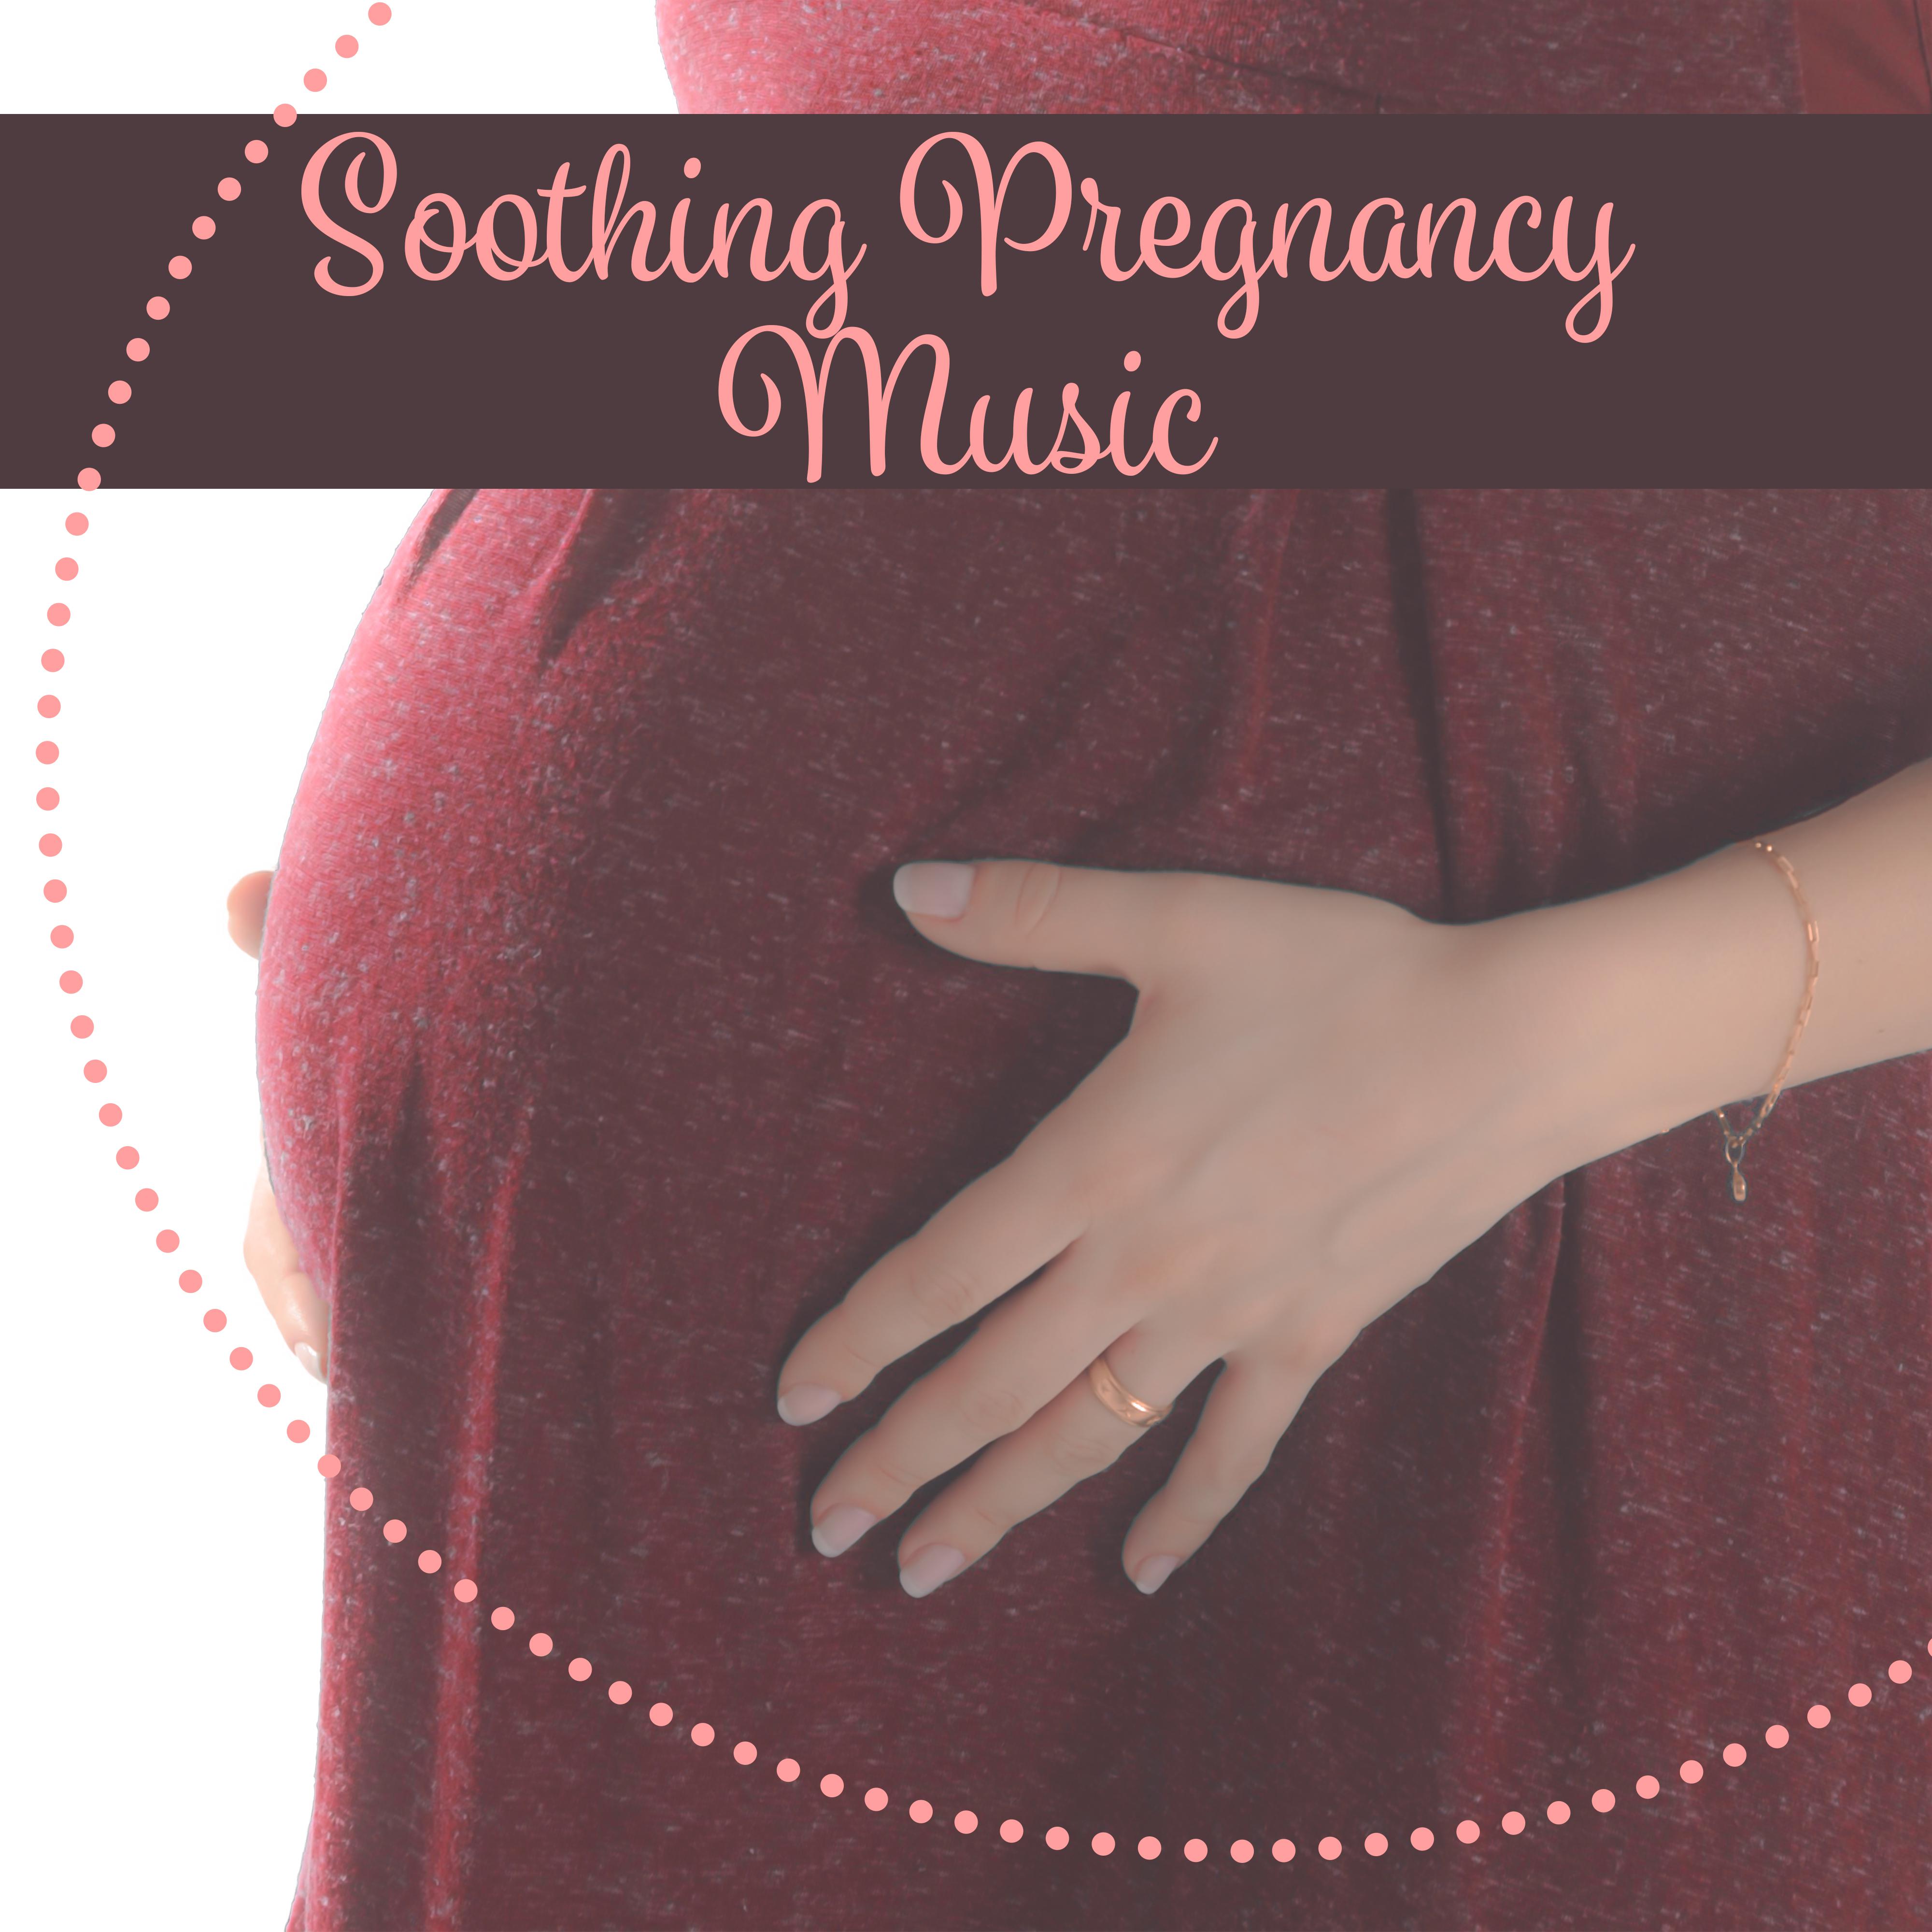 Soothing Pregnancy Music  Calm Music for Mothers, Pregnancy Relaxation, Music for Pregnant Women